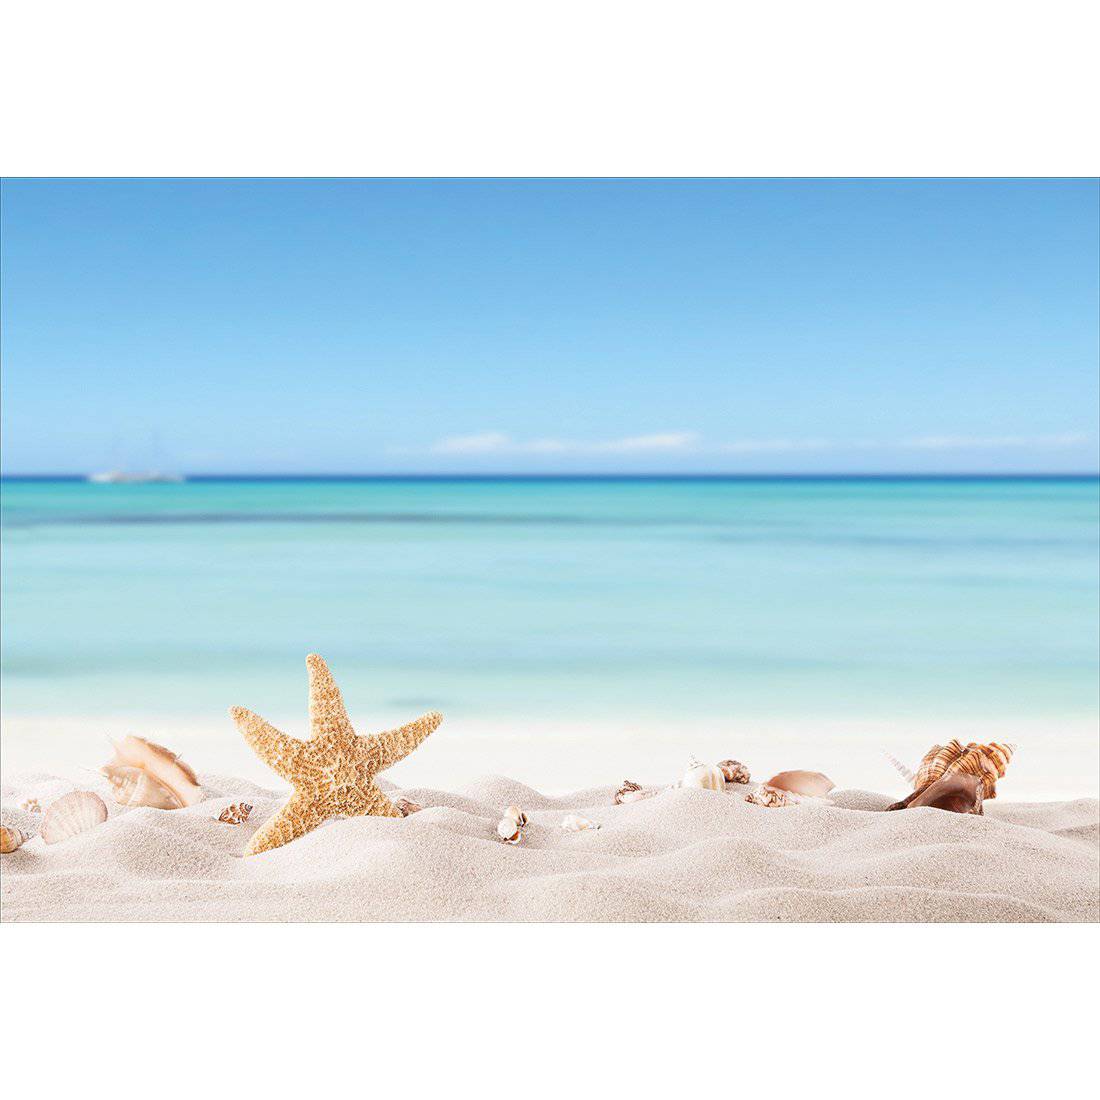 Starfish and Friends Canvas Art-Canvas-Wall Art Designs-45x30cm-Canvas - No Frame-Wall Art Designs